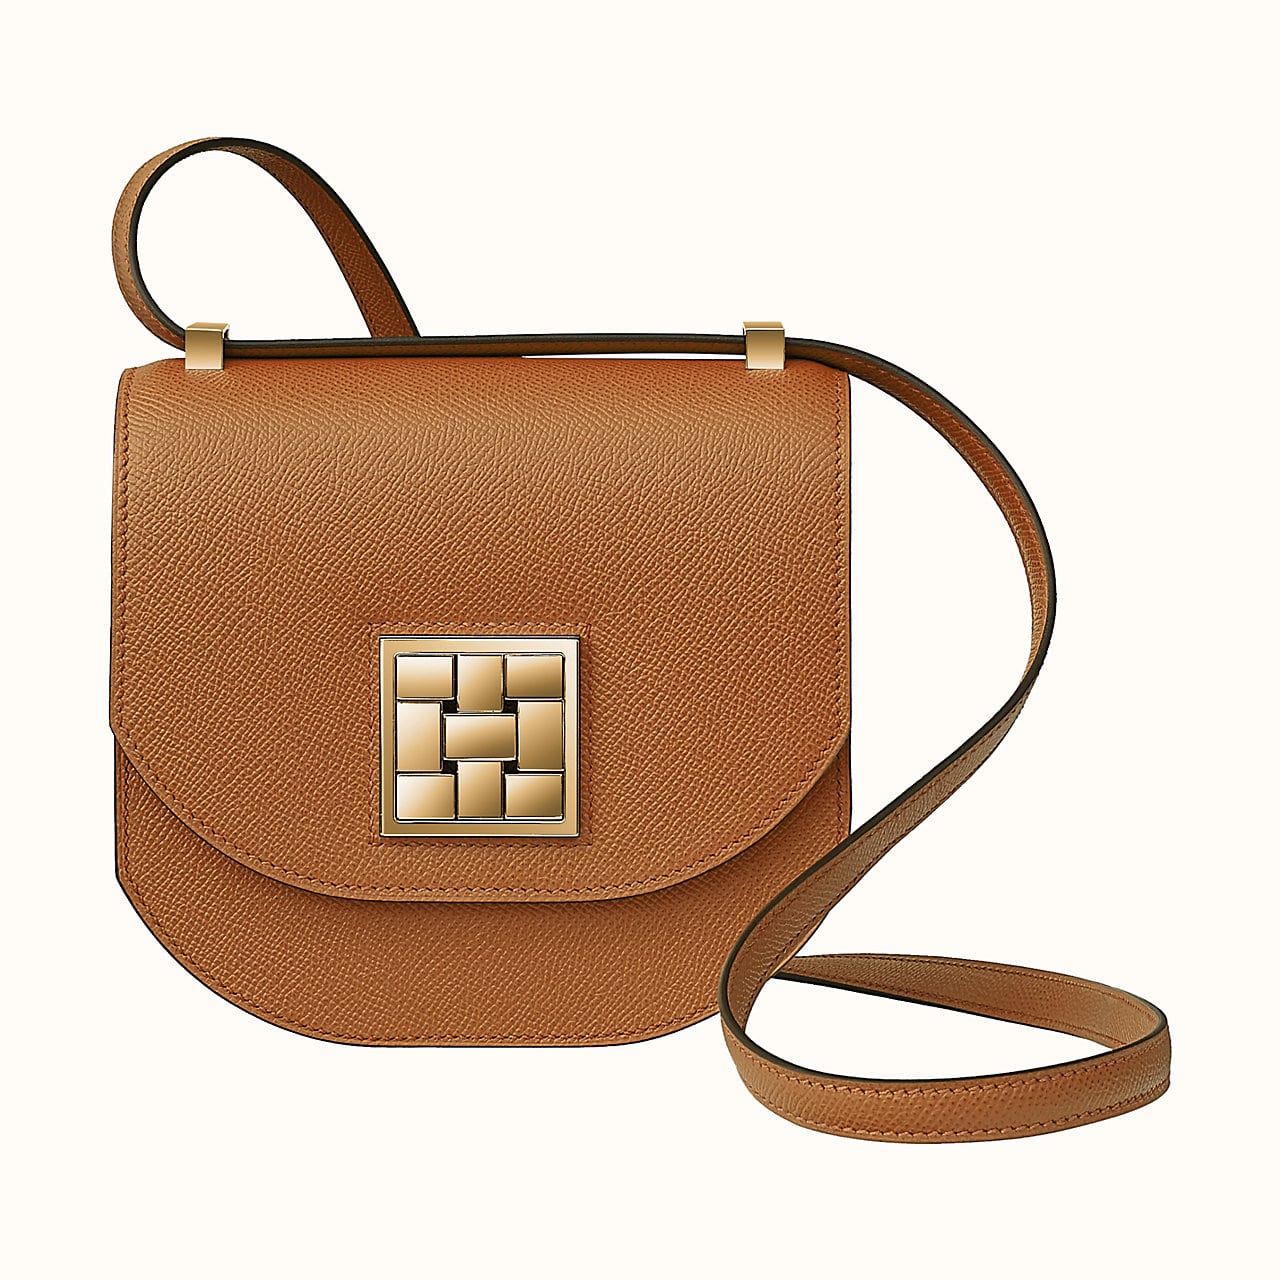 Hermes Mosaique Au 24 Bag Reference Guide | Spotted Fashion